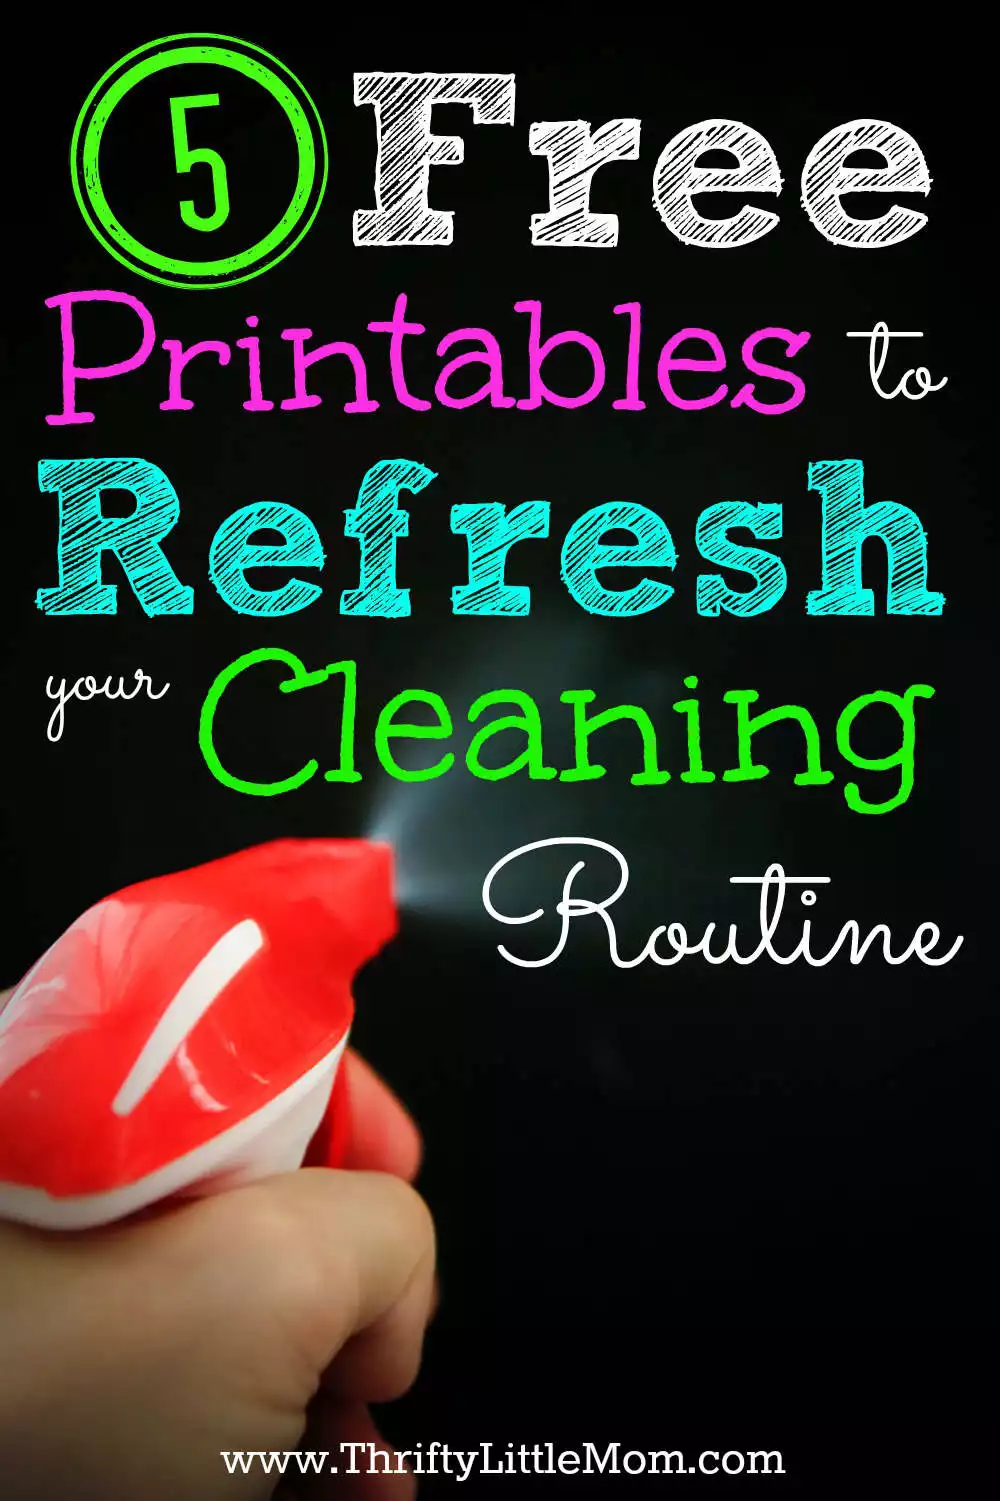 5 Free Printables to Refresh your cleaning routine. Get organized using your own home printer!